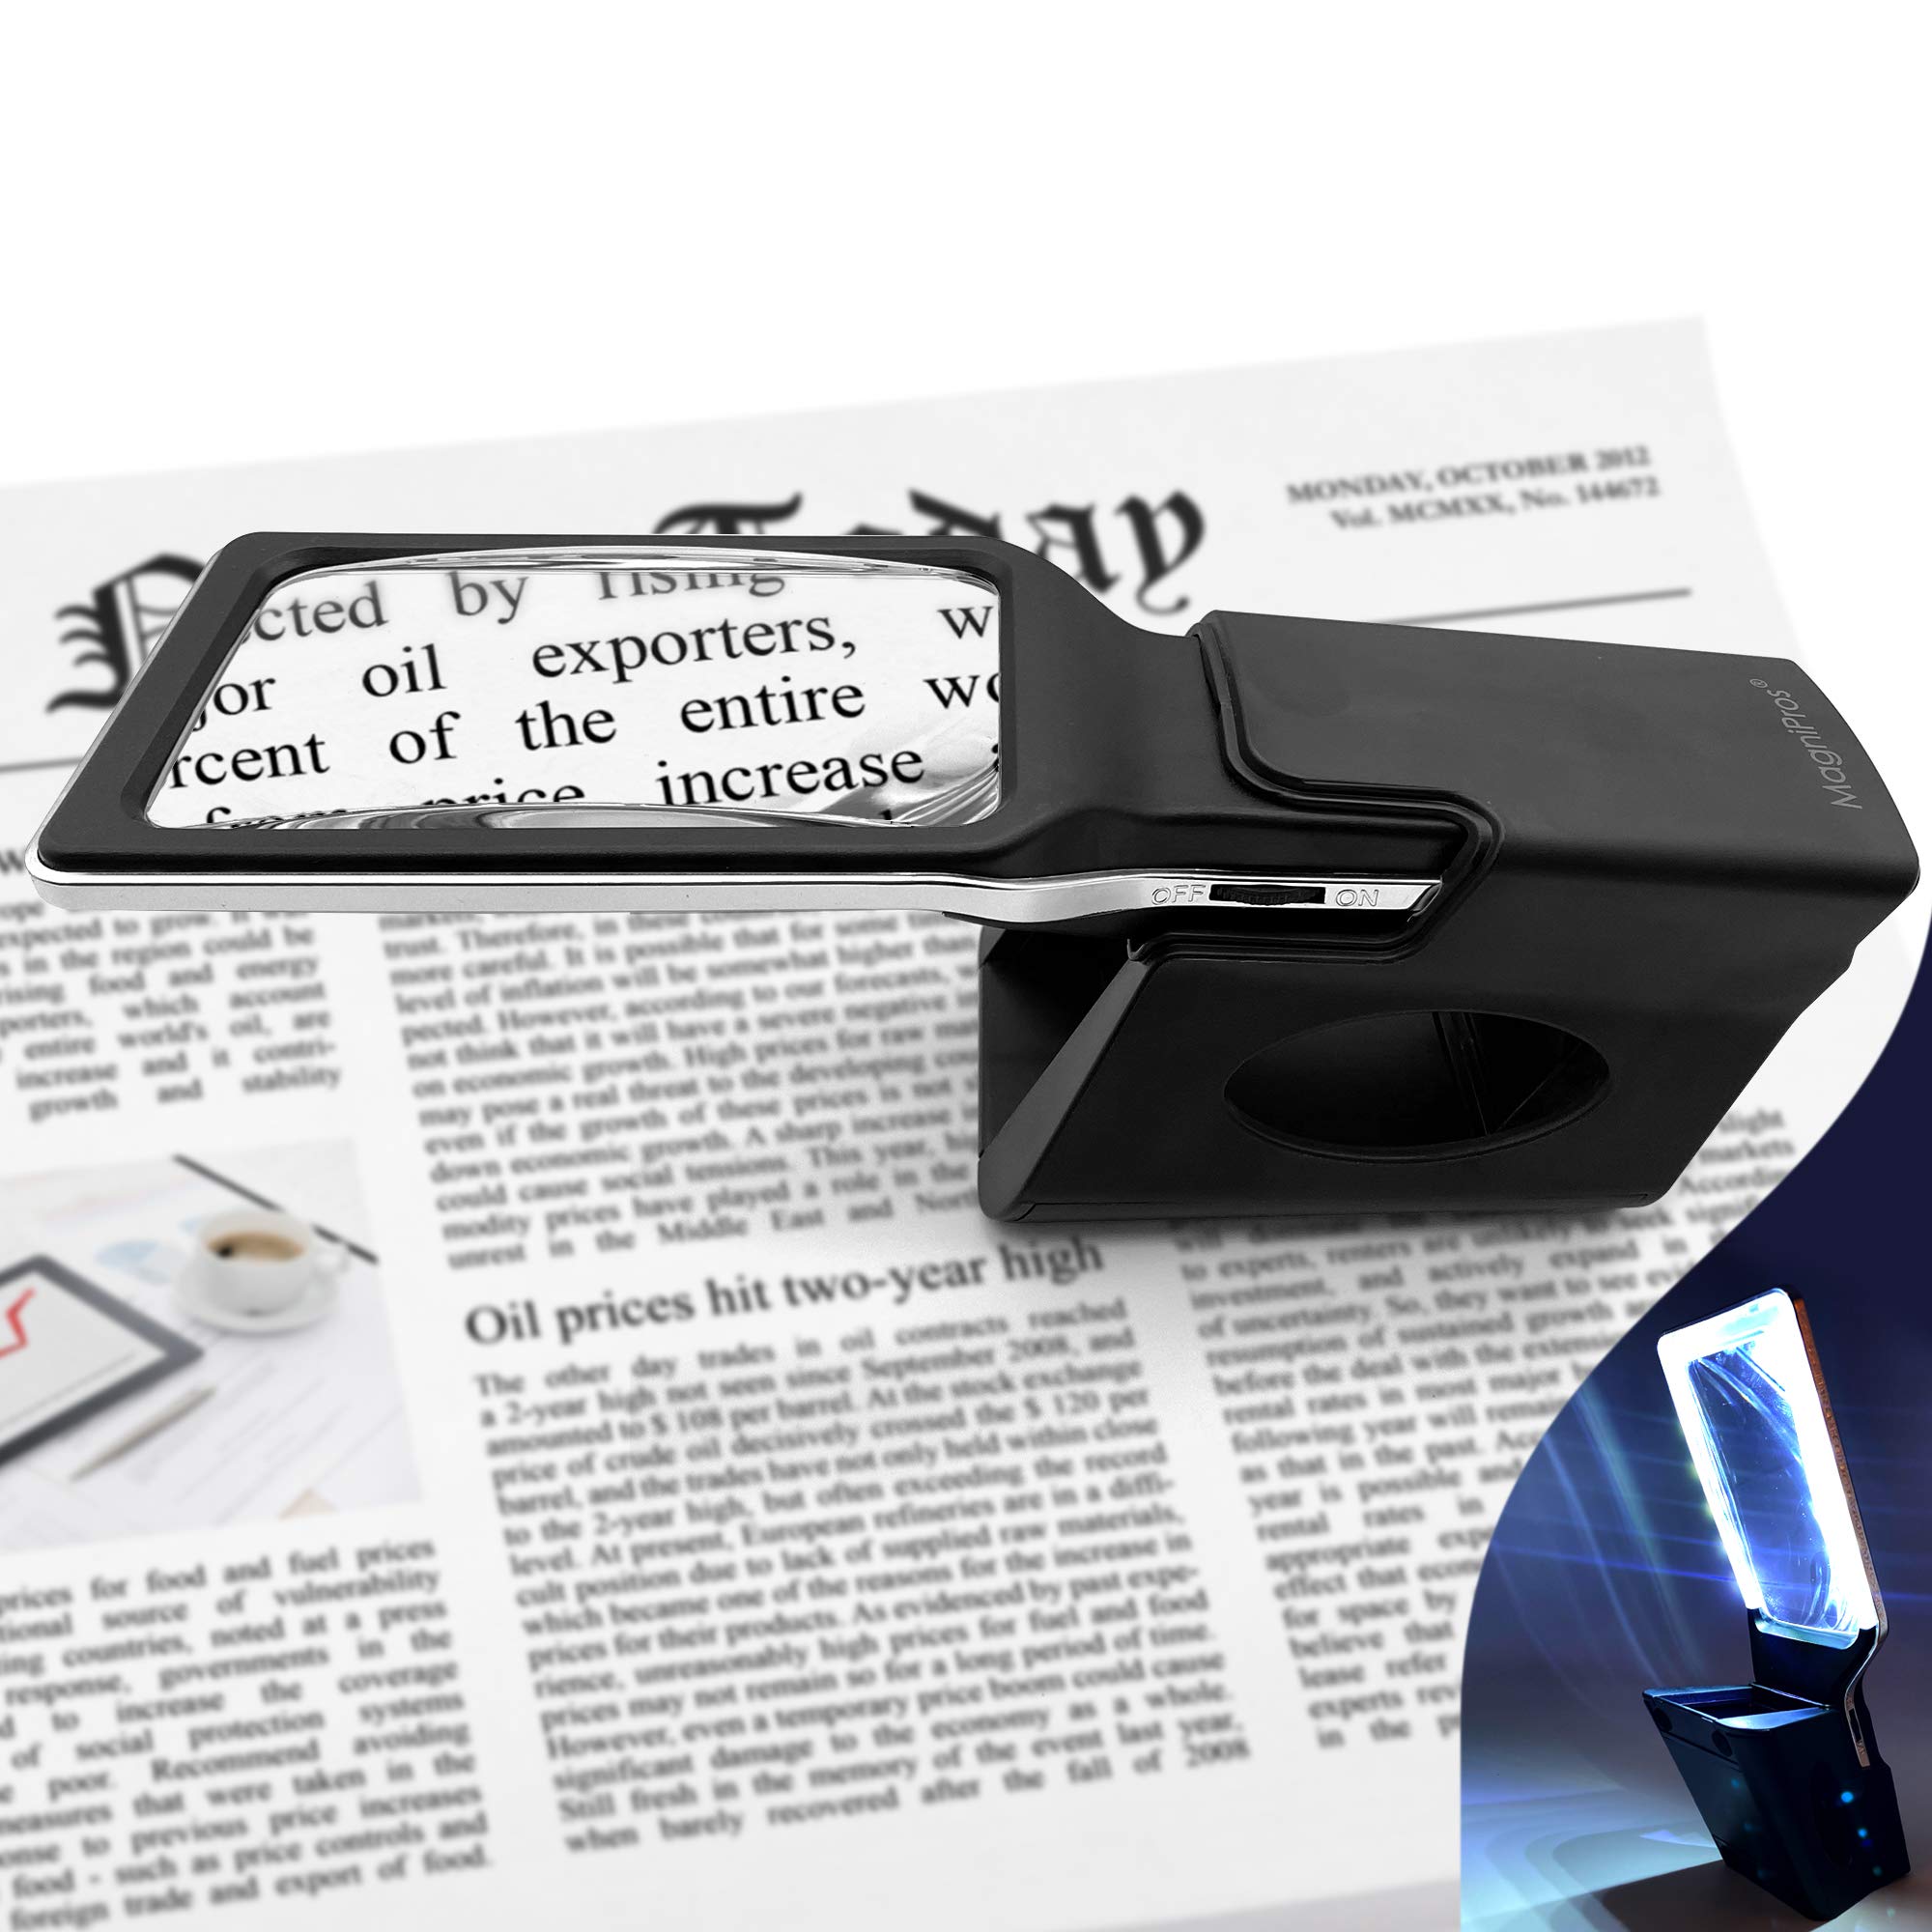 MagniPros 3X+5X LED Reading Magnifier with Compatible Holder/Stand to Free up Your Hands